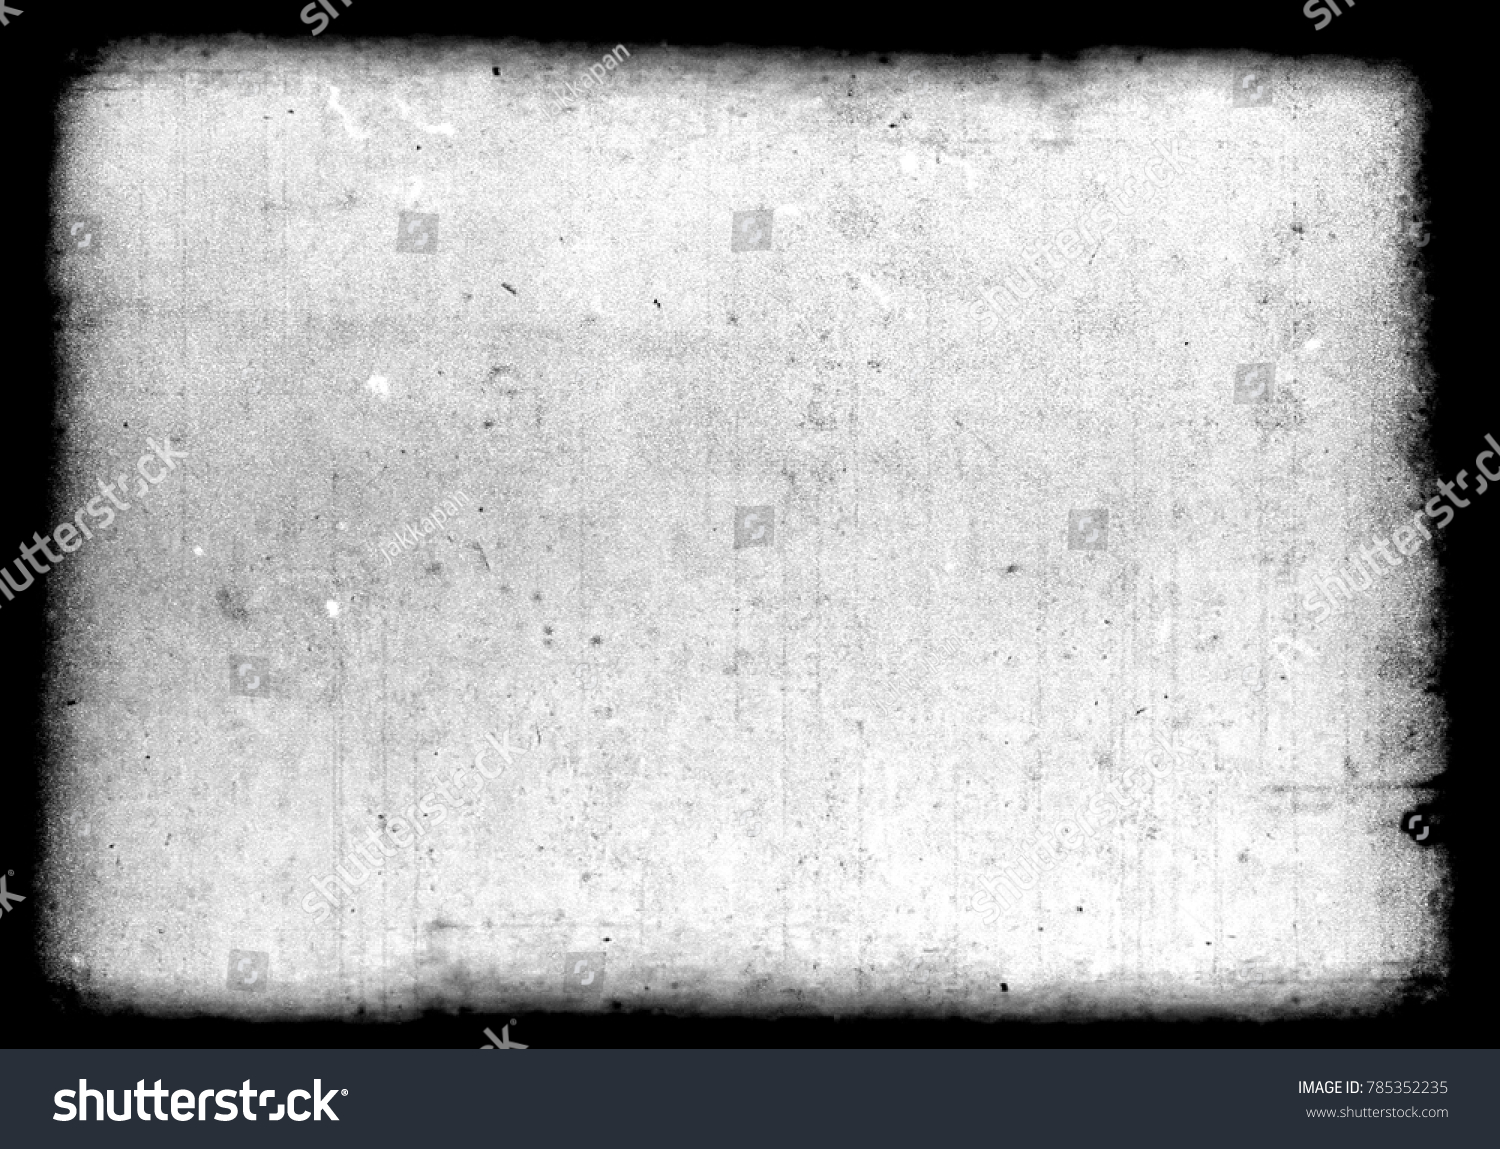 Abstract dirty or aging film frame. Dust particle and dust grain texture or dirt overlay use effect for film frame with space for your text or image and vintage grunge style. #785352235